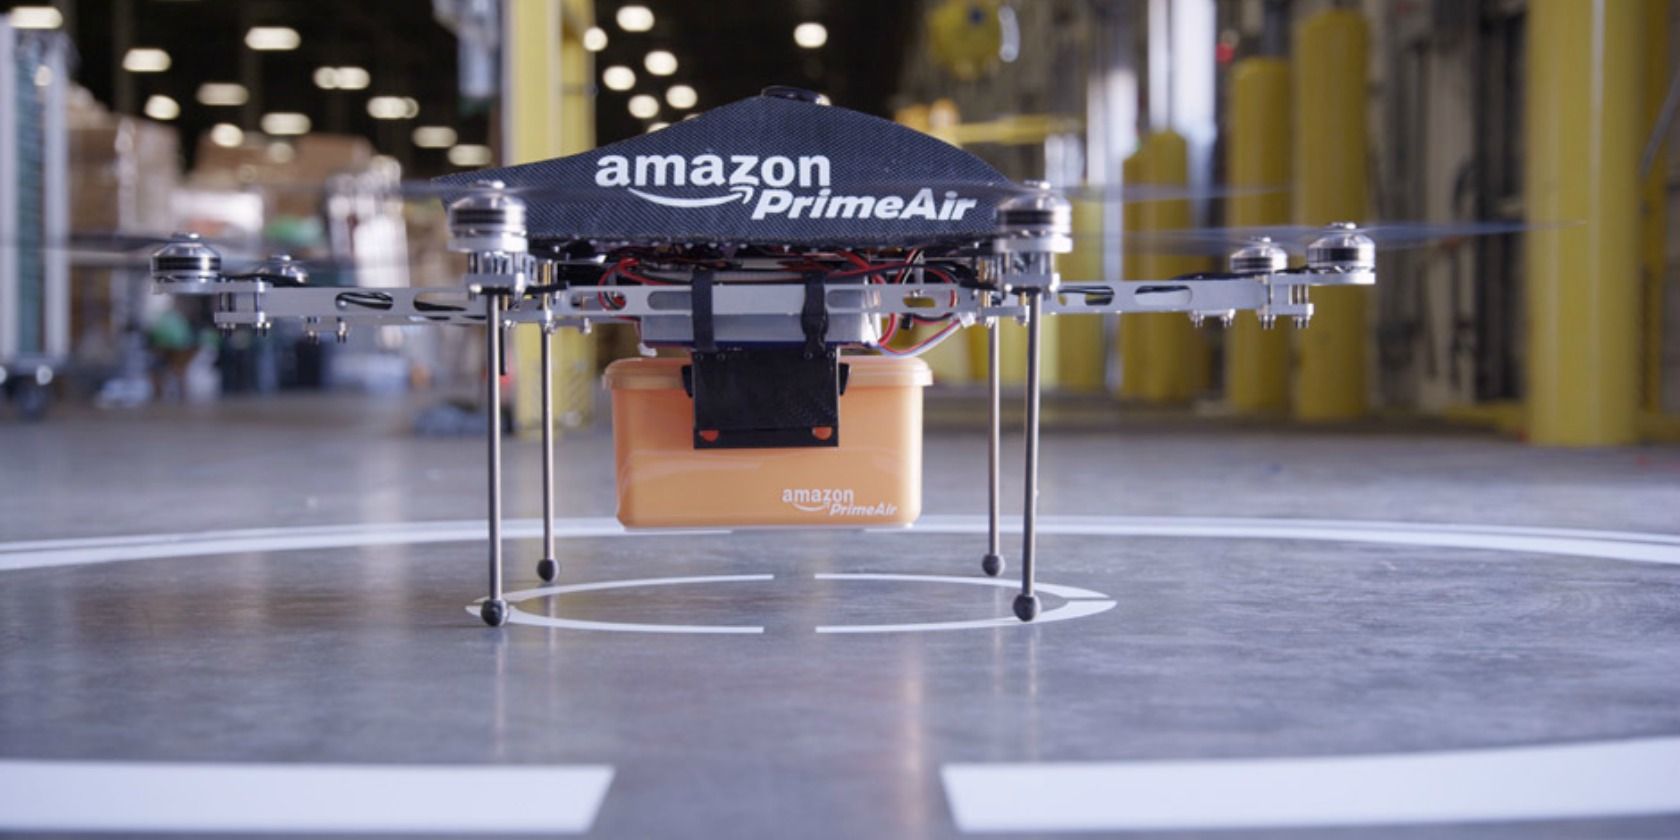 Whatever Happened to Amazon's Delivery Drones?